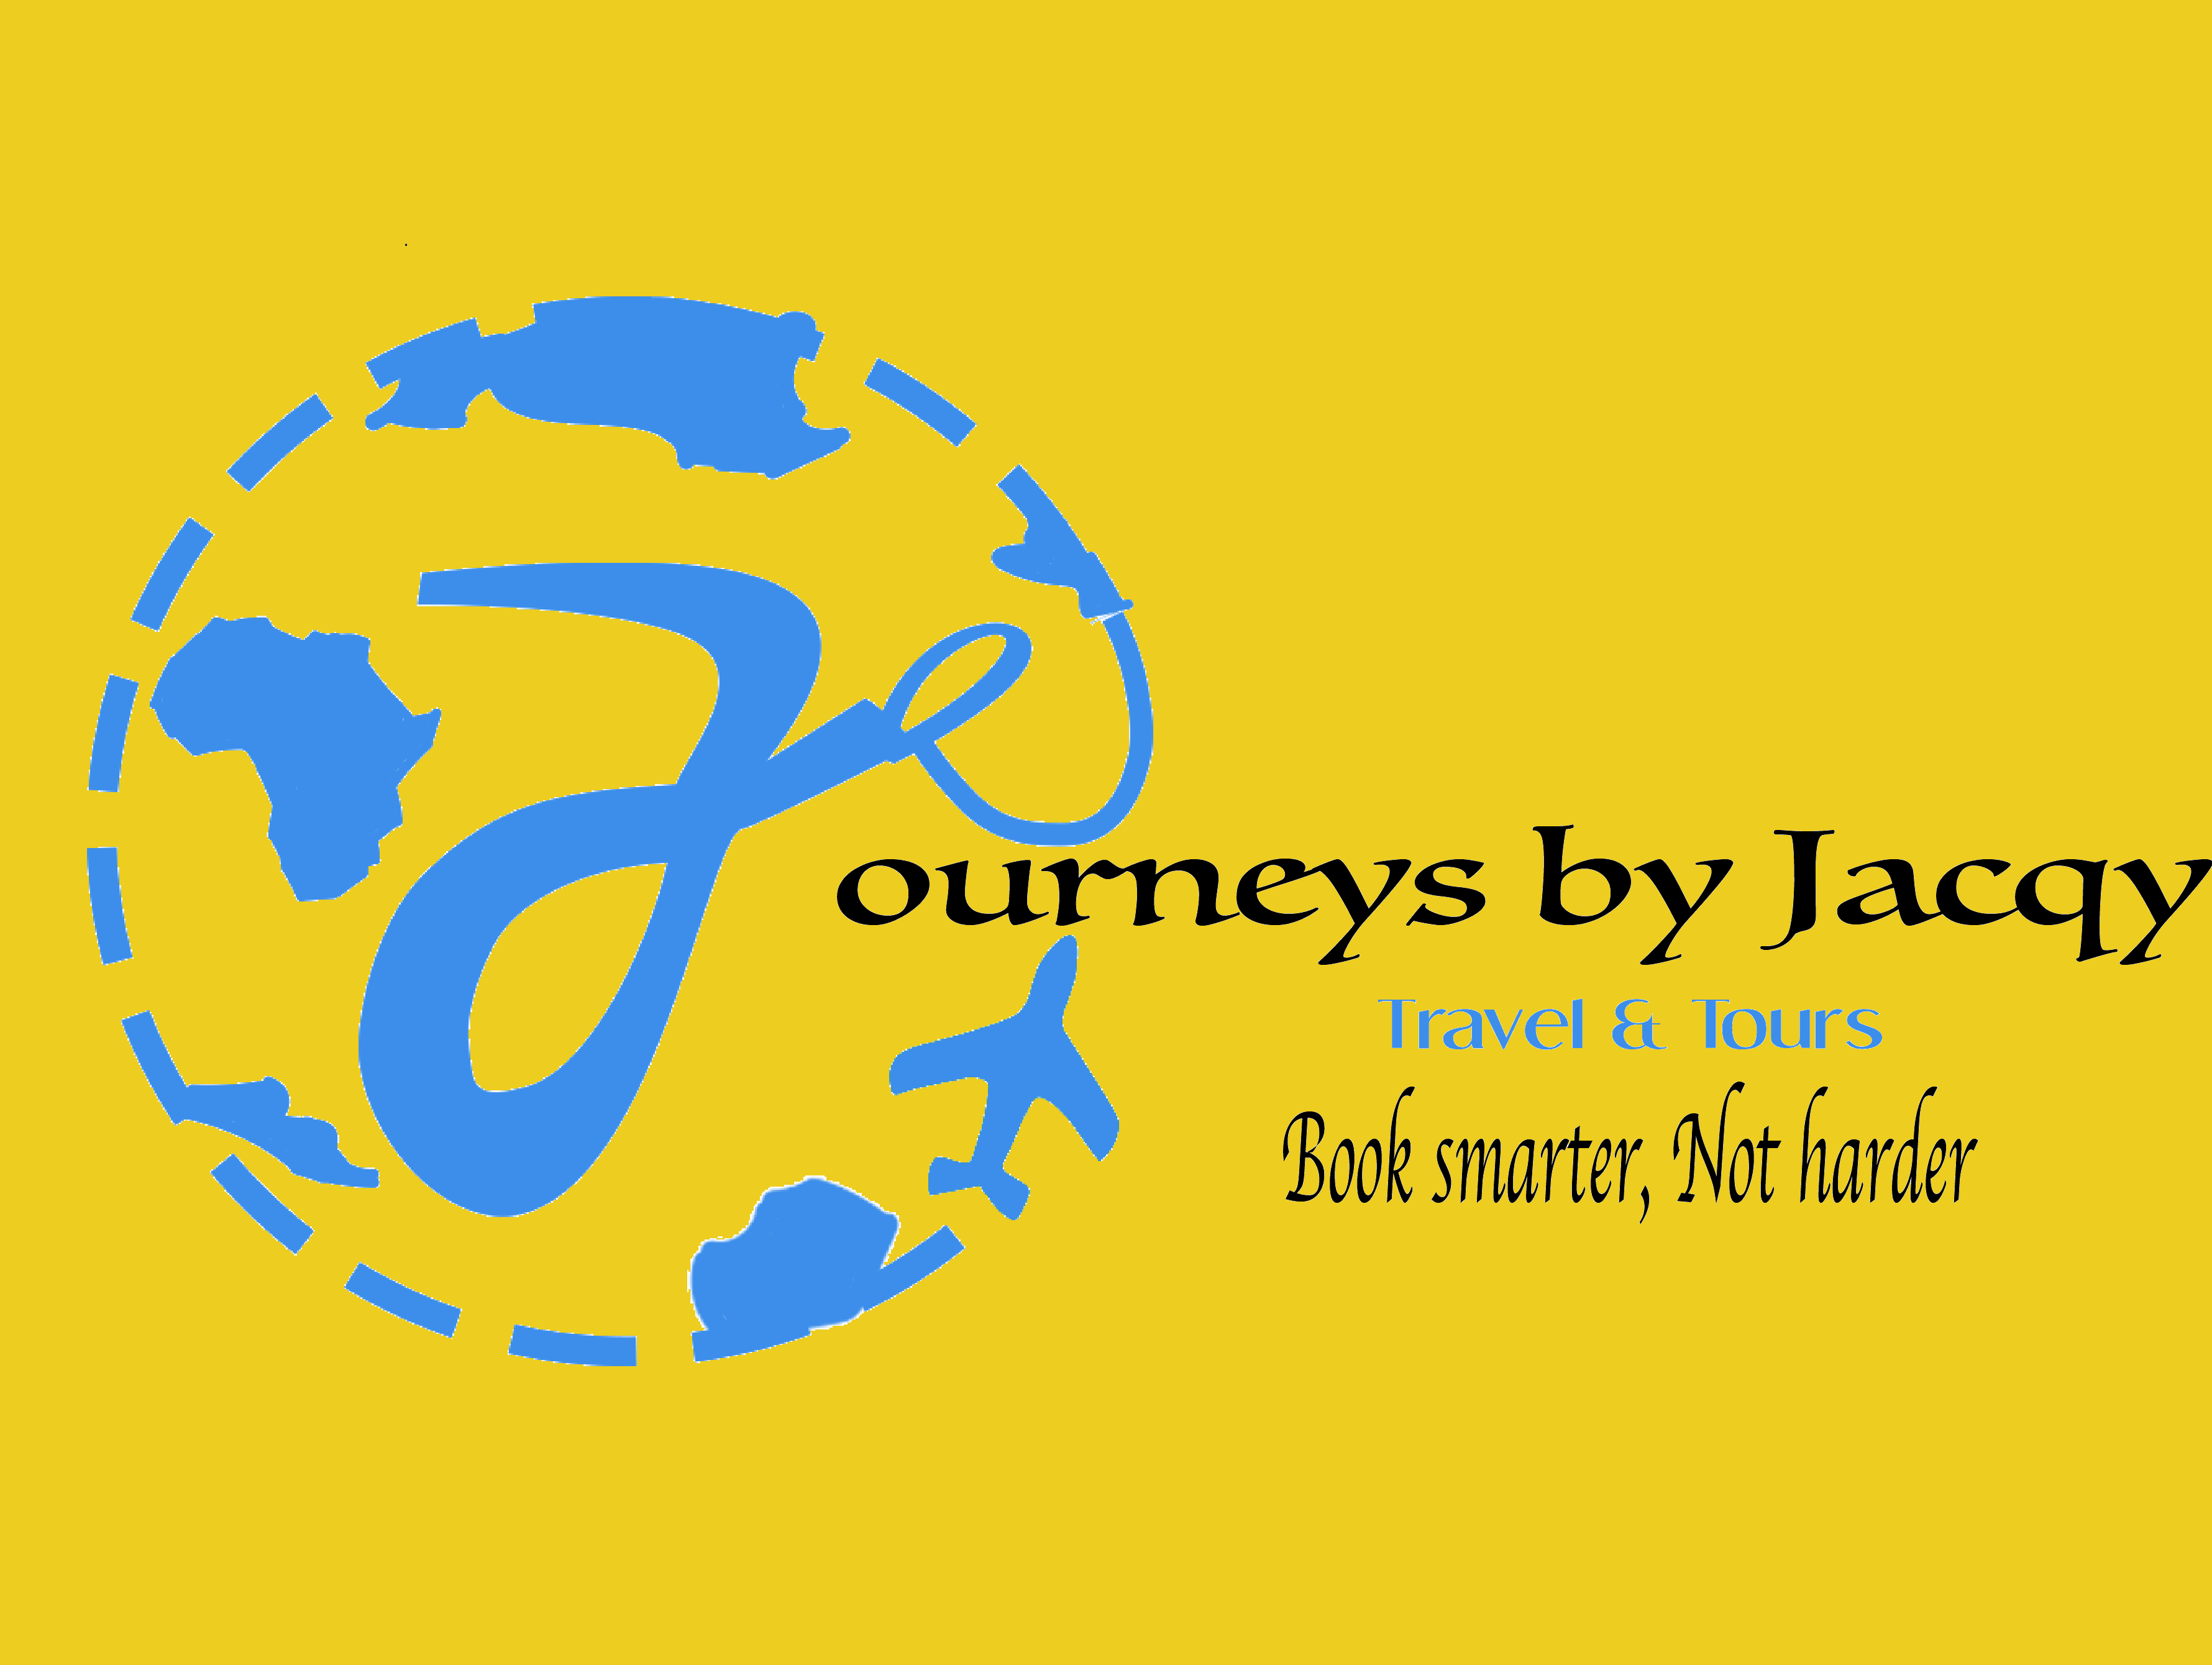 Journeys by Jacqy Logo